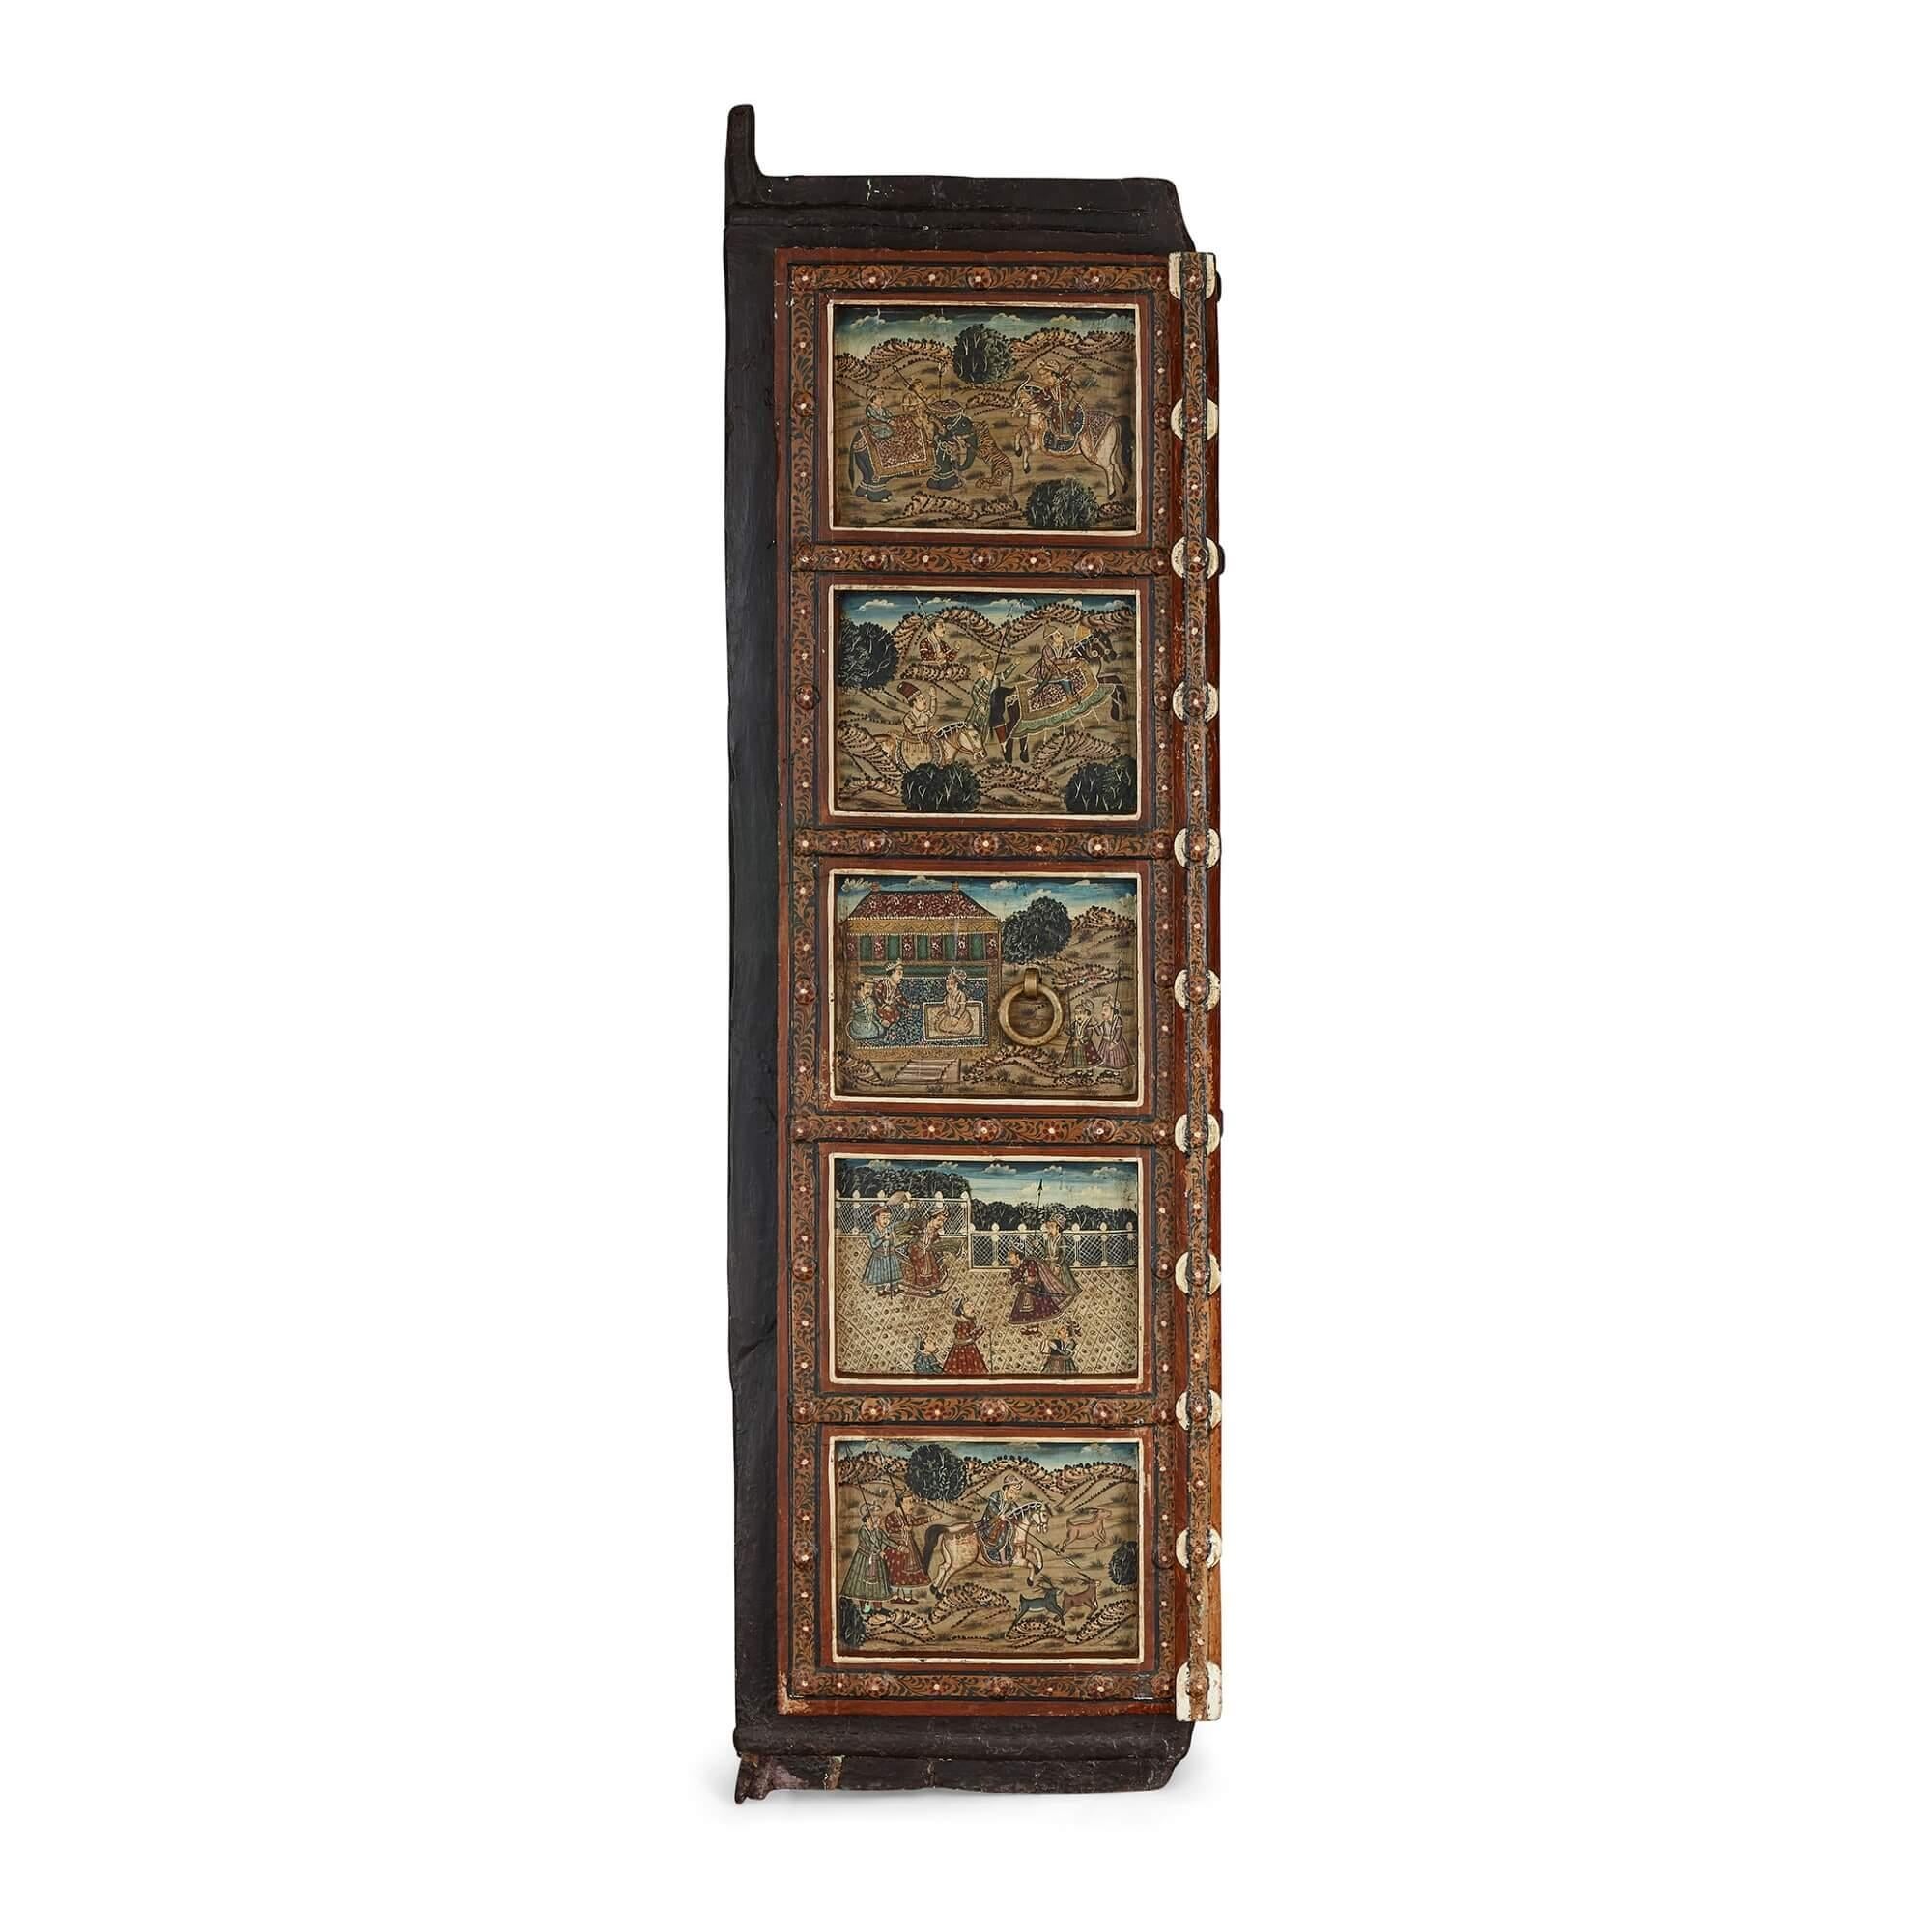 Pair of Indian wooden doors with painted decoration
Indian, 19th Century
Height 165cm, width side-by-side 96cm, depth 10cm

This pair of wooden doors is painted with a host of superb Indian imagery. The doors feature wrought iron fixtures, and each